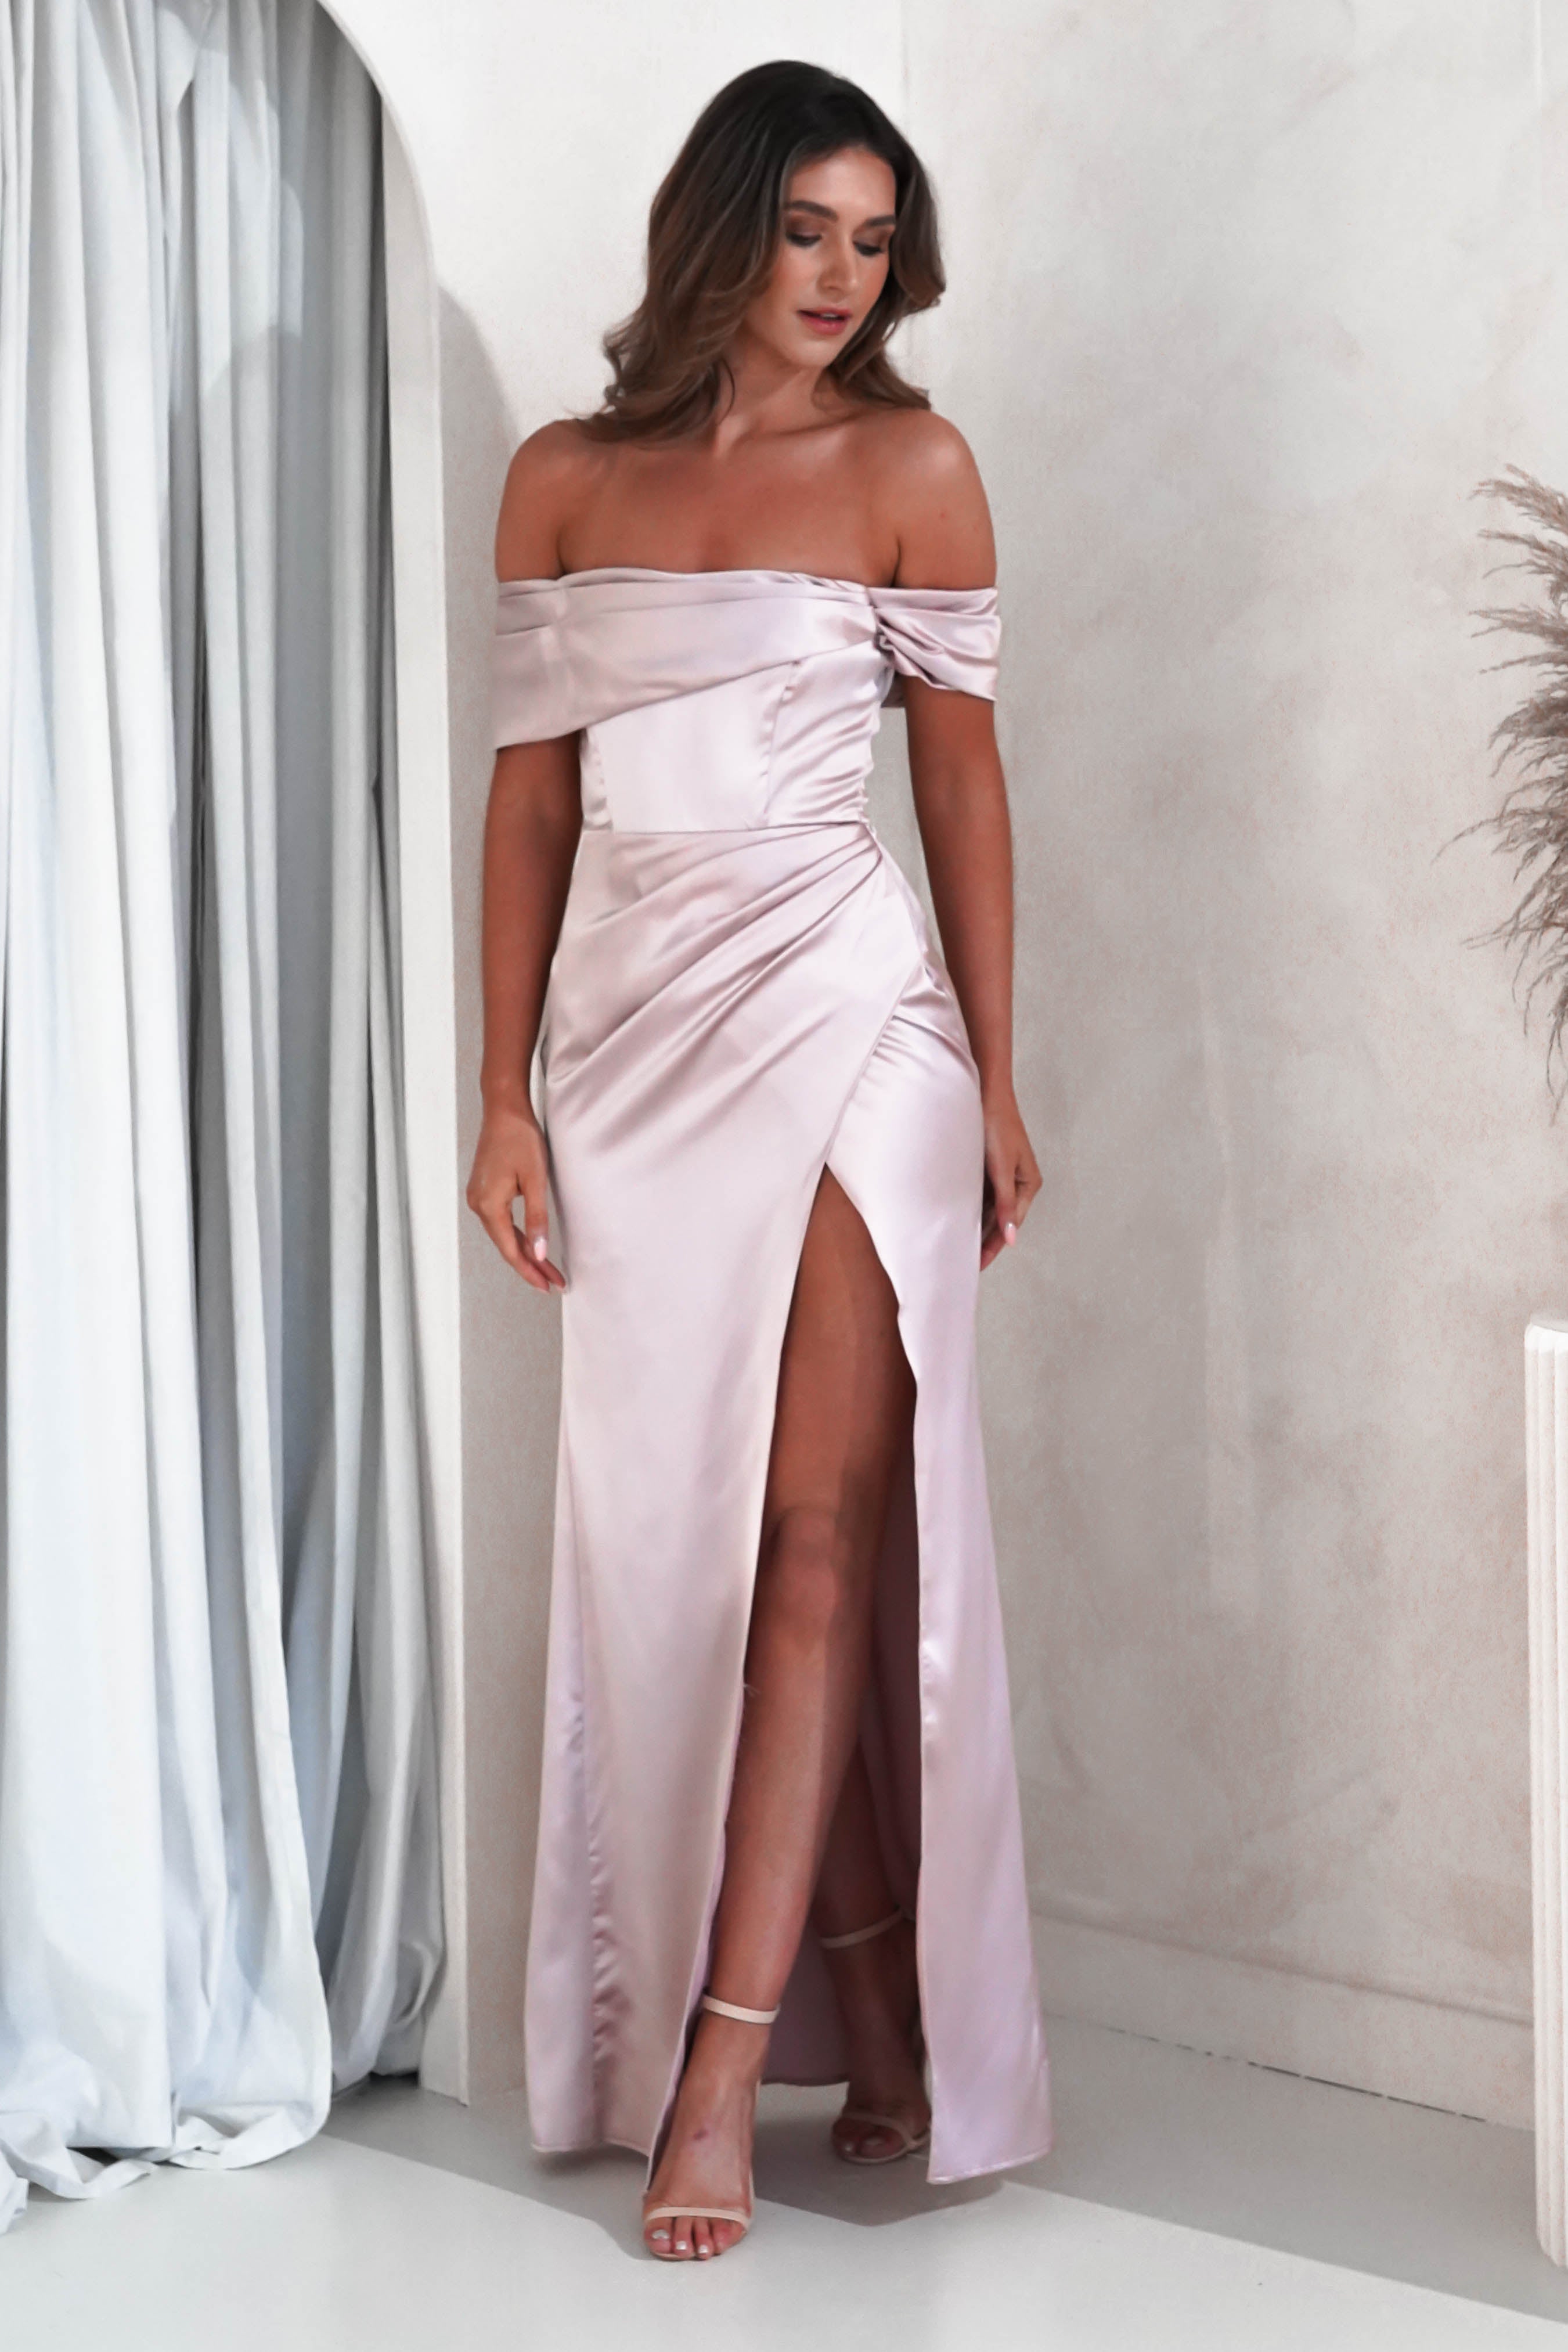 done-mm2407-off-the-shoulde-gown-similar-to-monica-pink-champagne-maniju-dresses-52536960352597.jpg